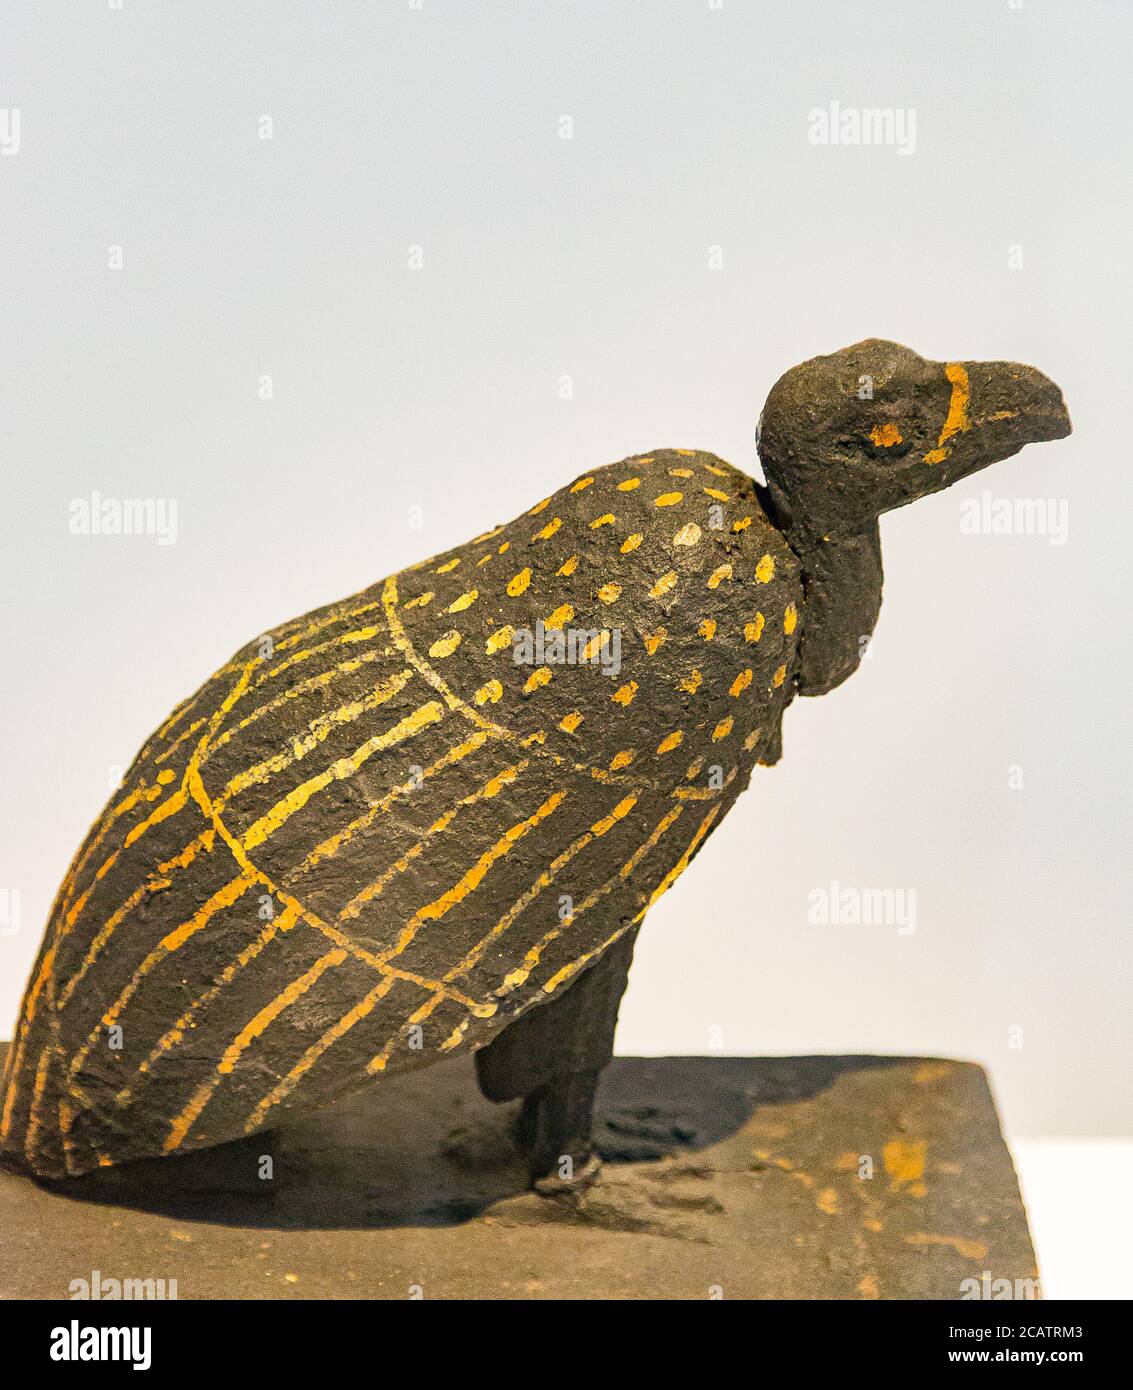 Exhibition 'The animal kingdom in Ancient Egypt', organized in 2015 by the Louvre Museum in Lens. Statuette of a vulture, painted wood. Stock Photo